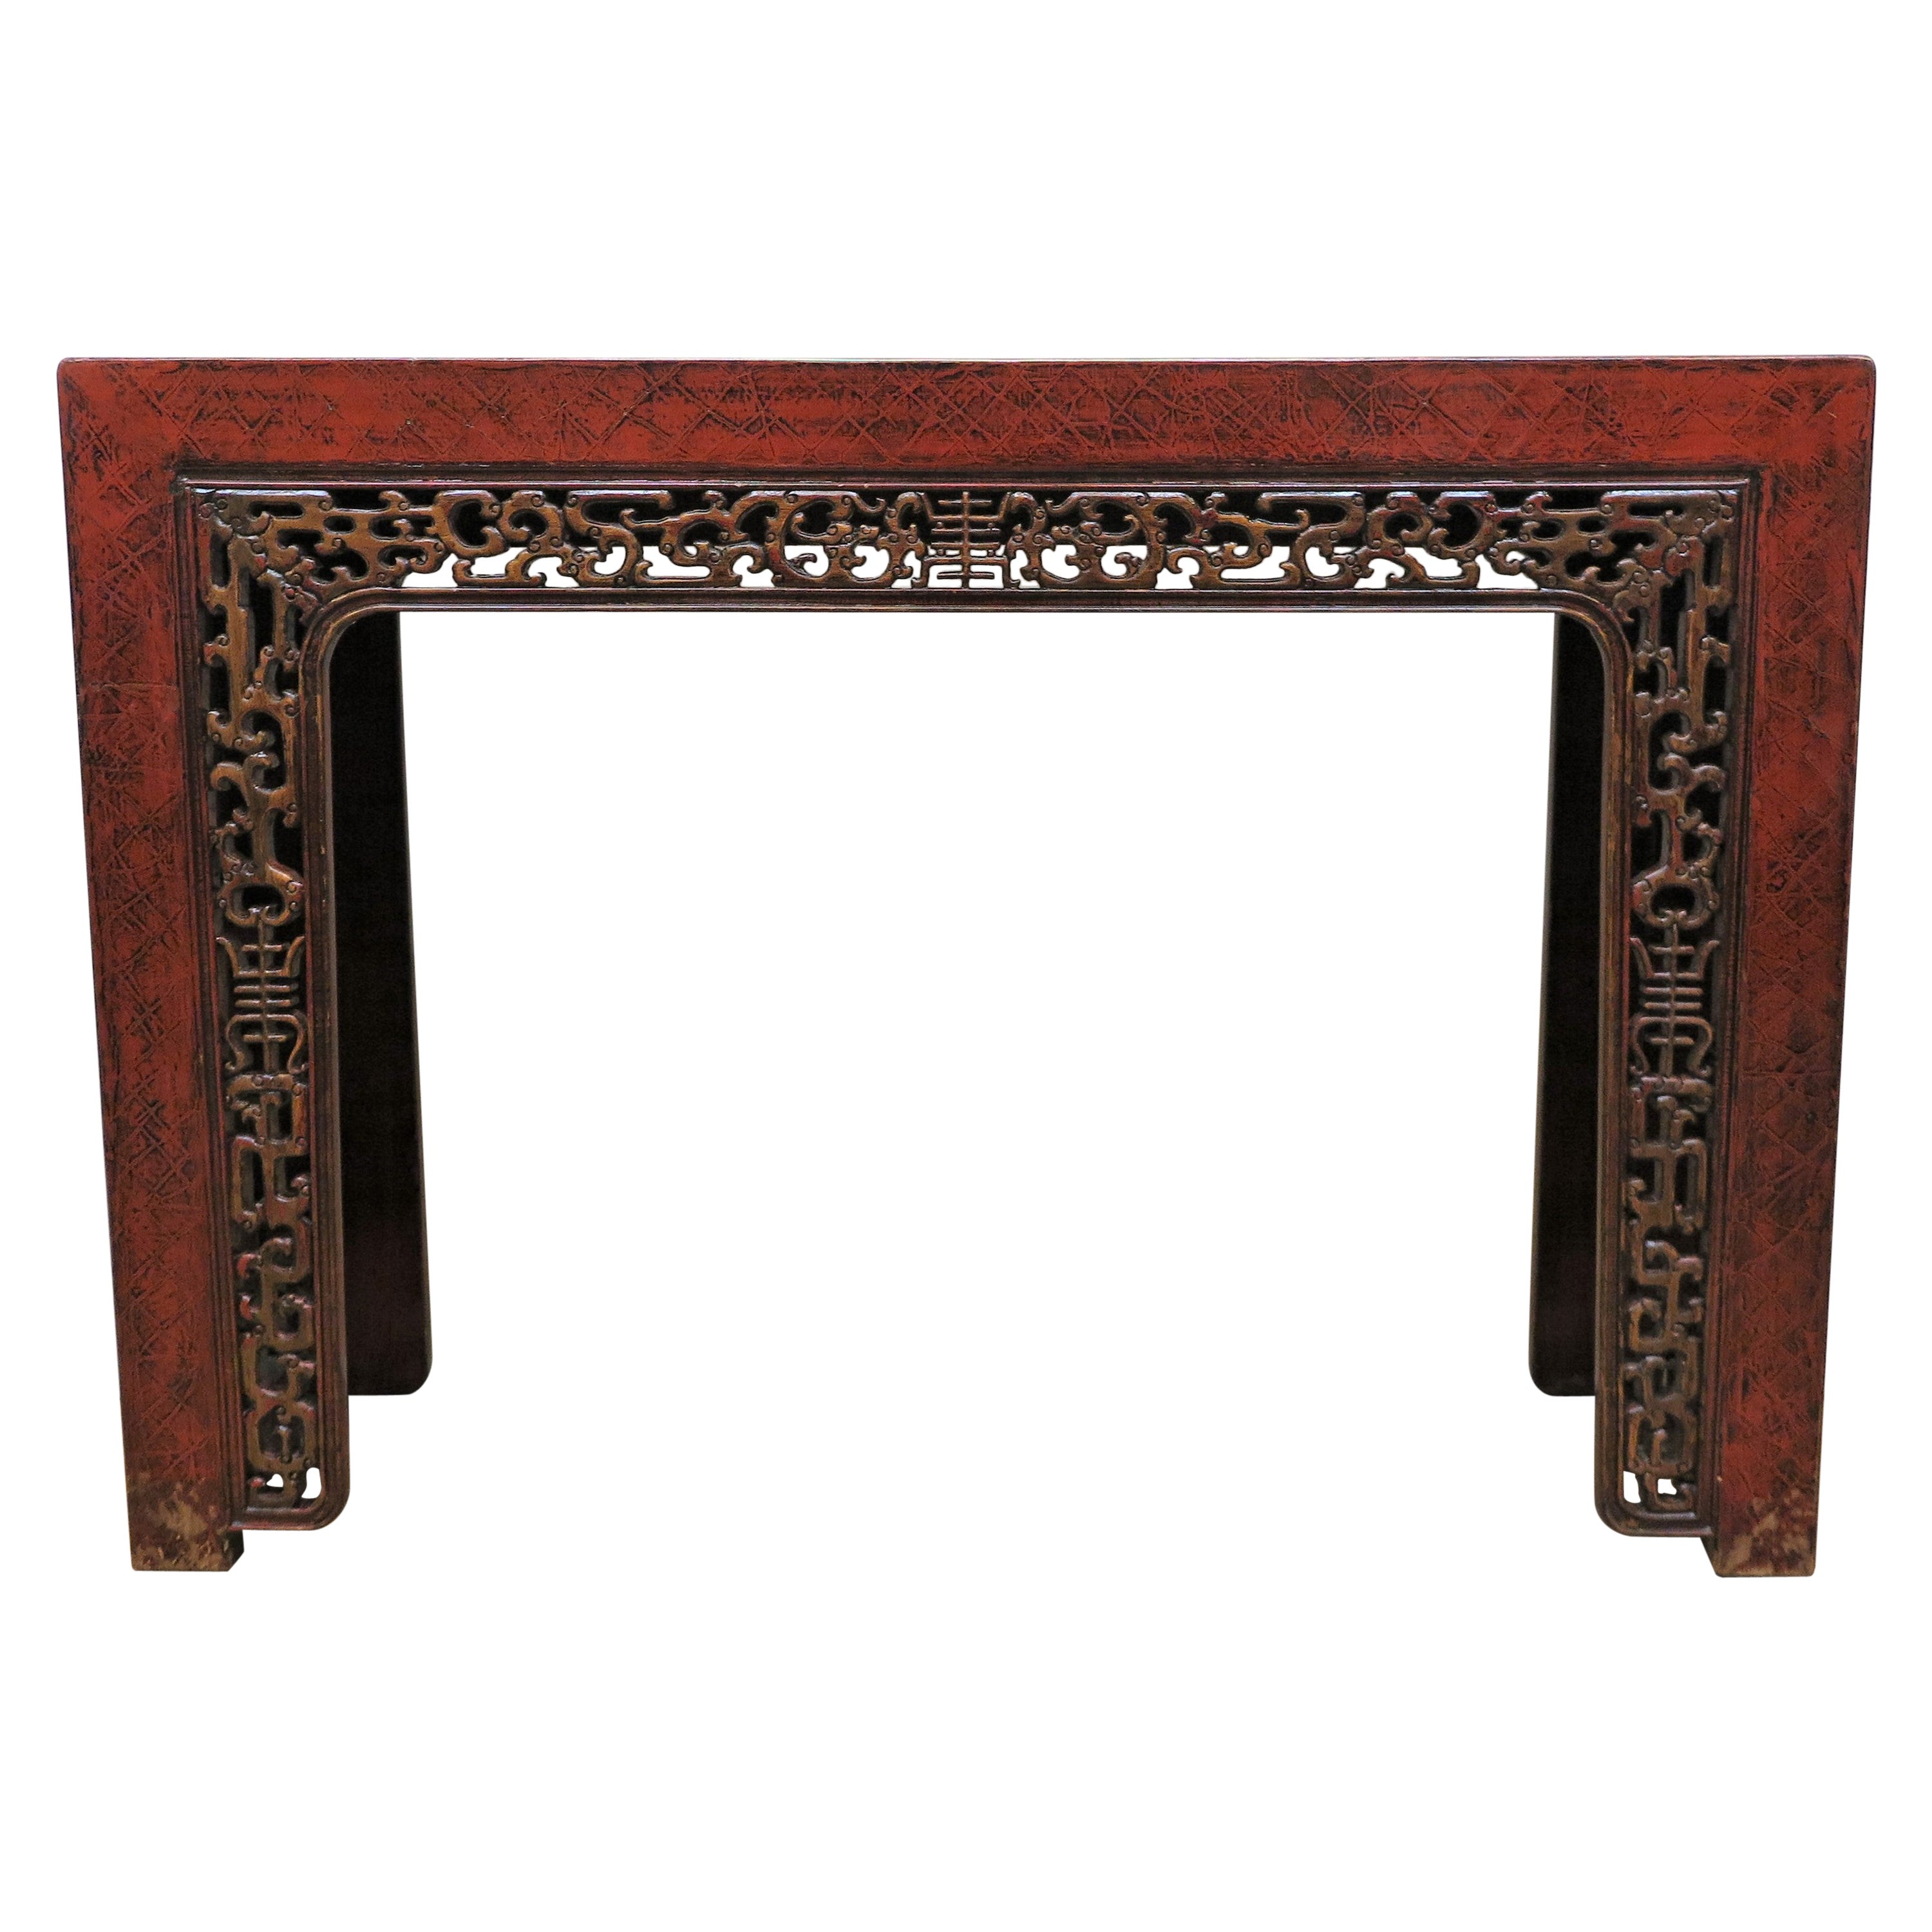 Ancienne table console chinoise en laque rouge